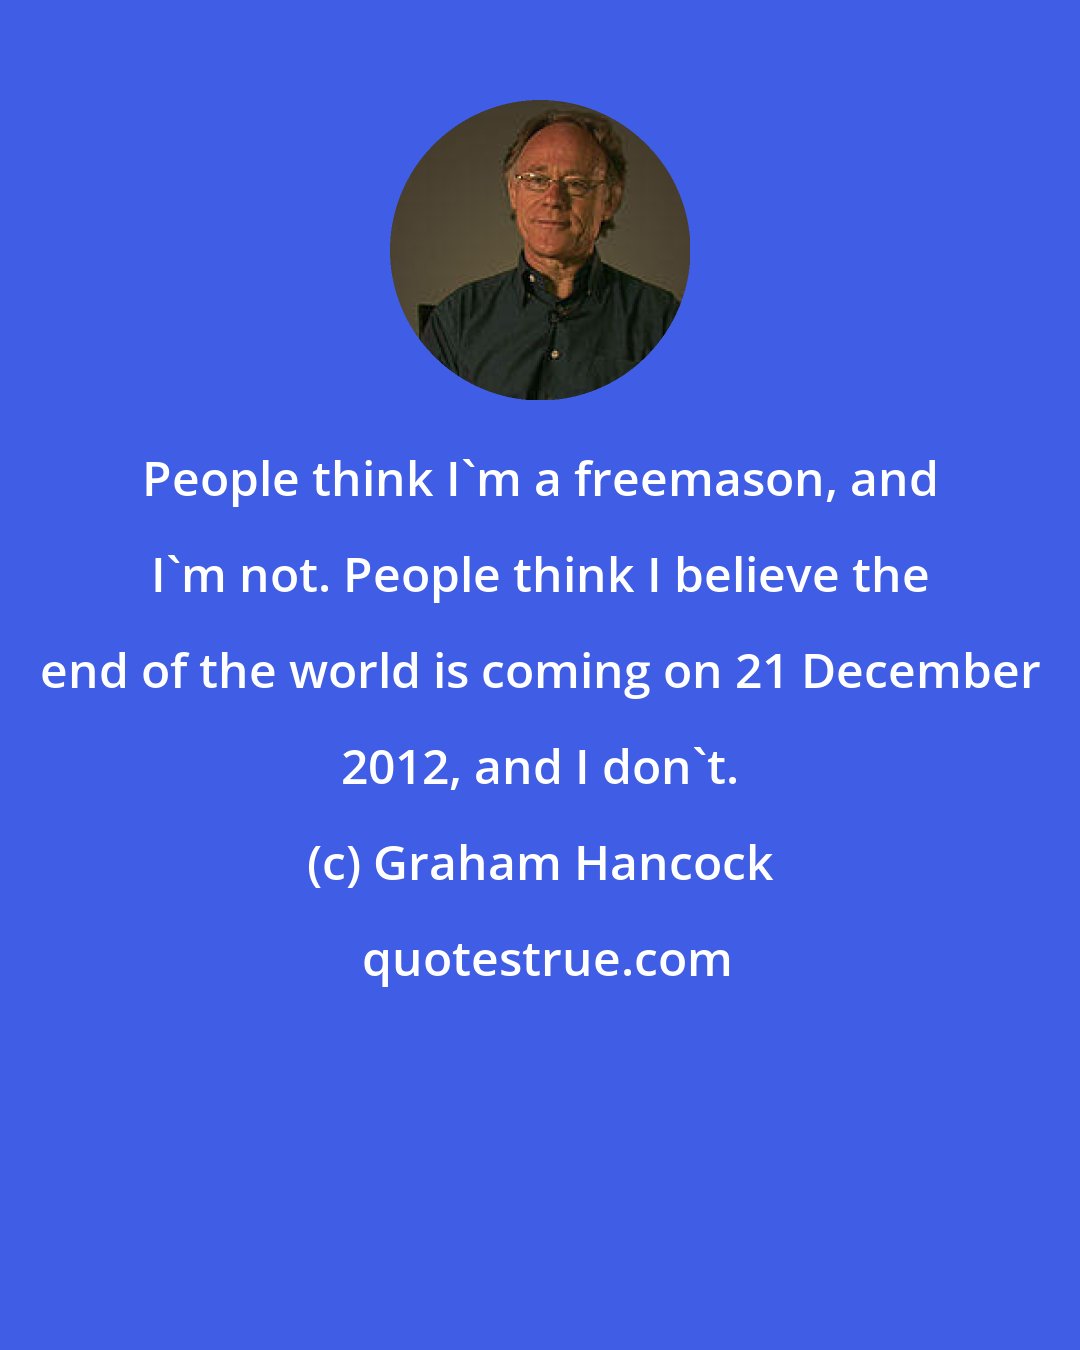 Graham Hancock: People think I'm a freemason, and I'm not. People think I believe the end of the world is coming on 21 December 2012, and I don't.